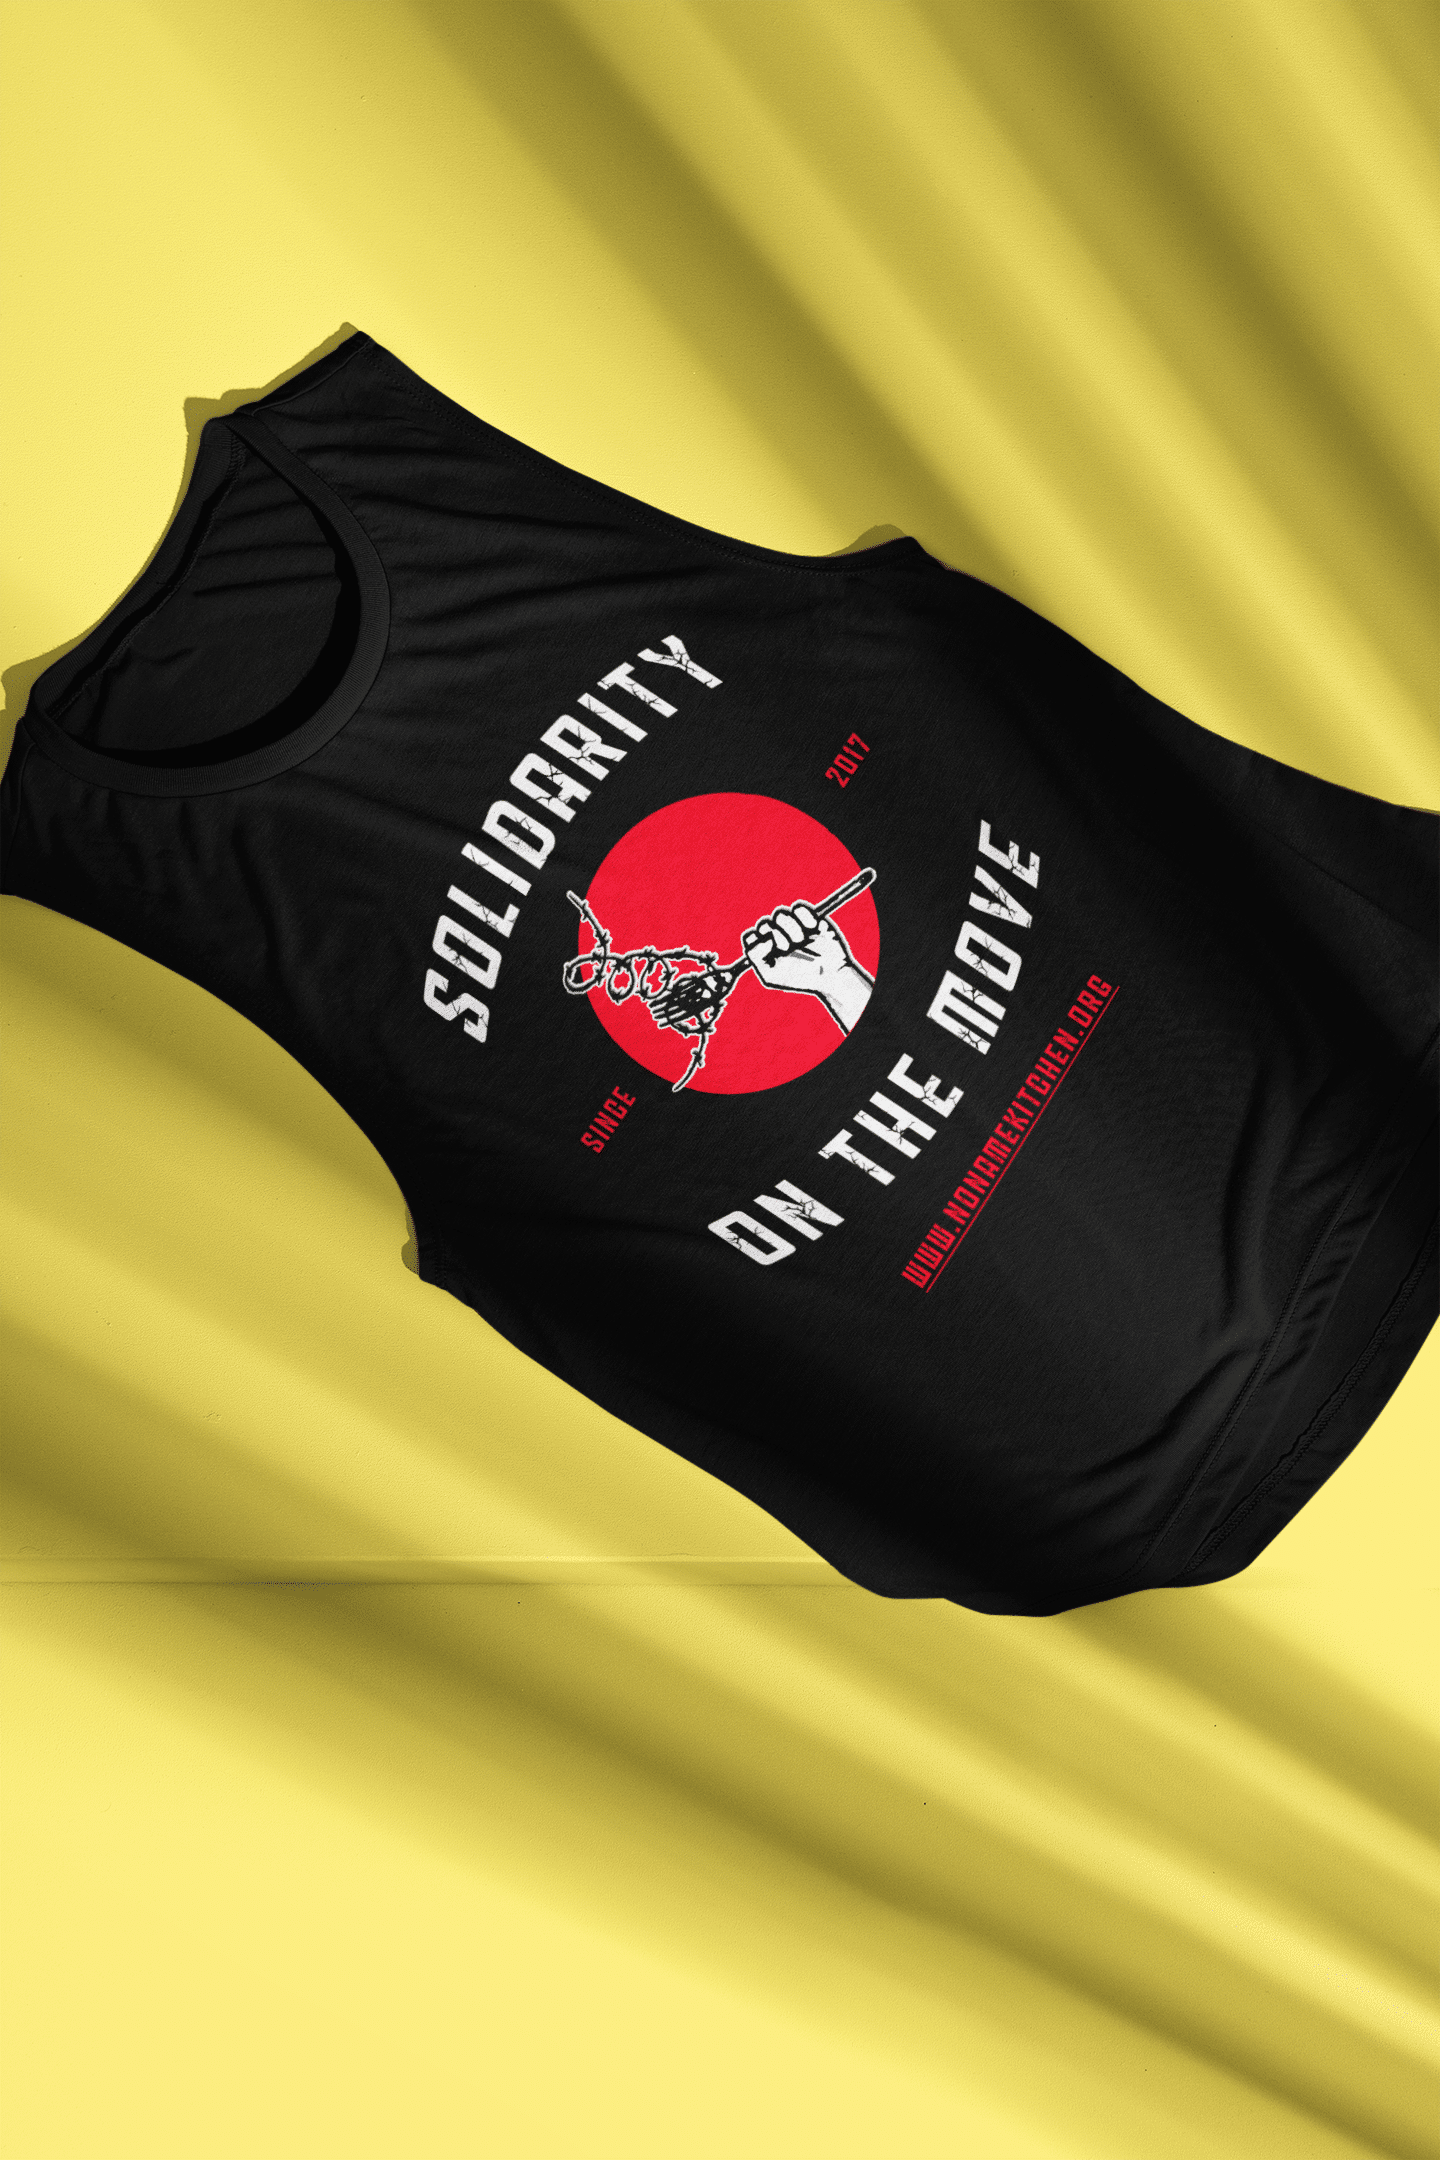 Tank Top “SOLIDARITY ON THE MOVE”